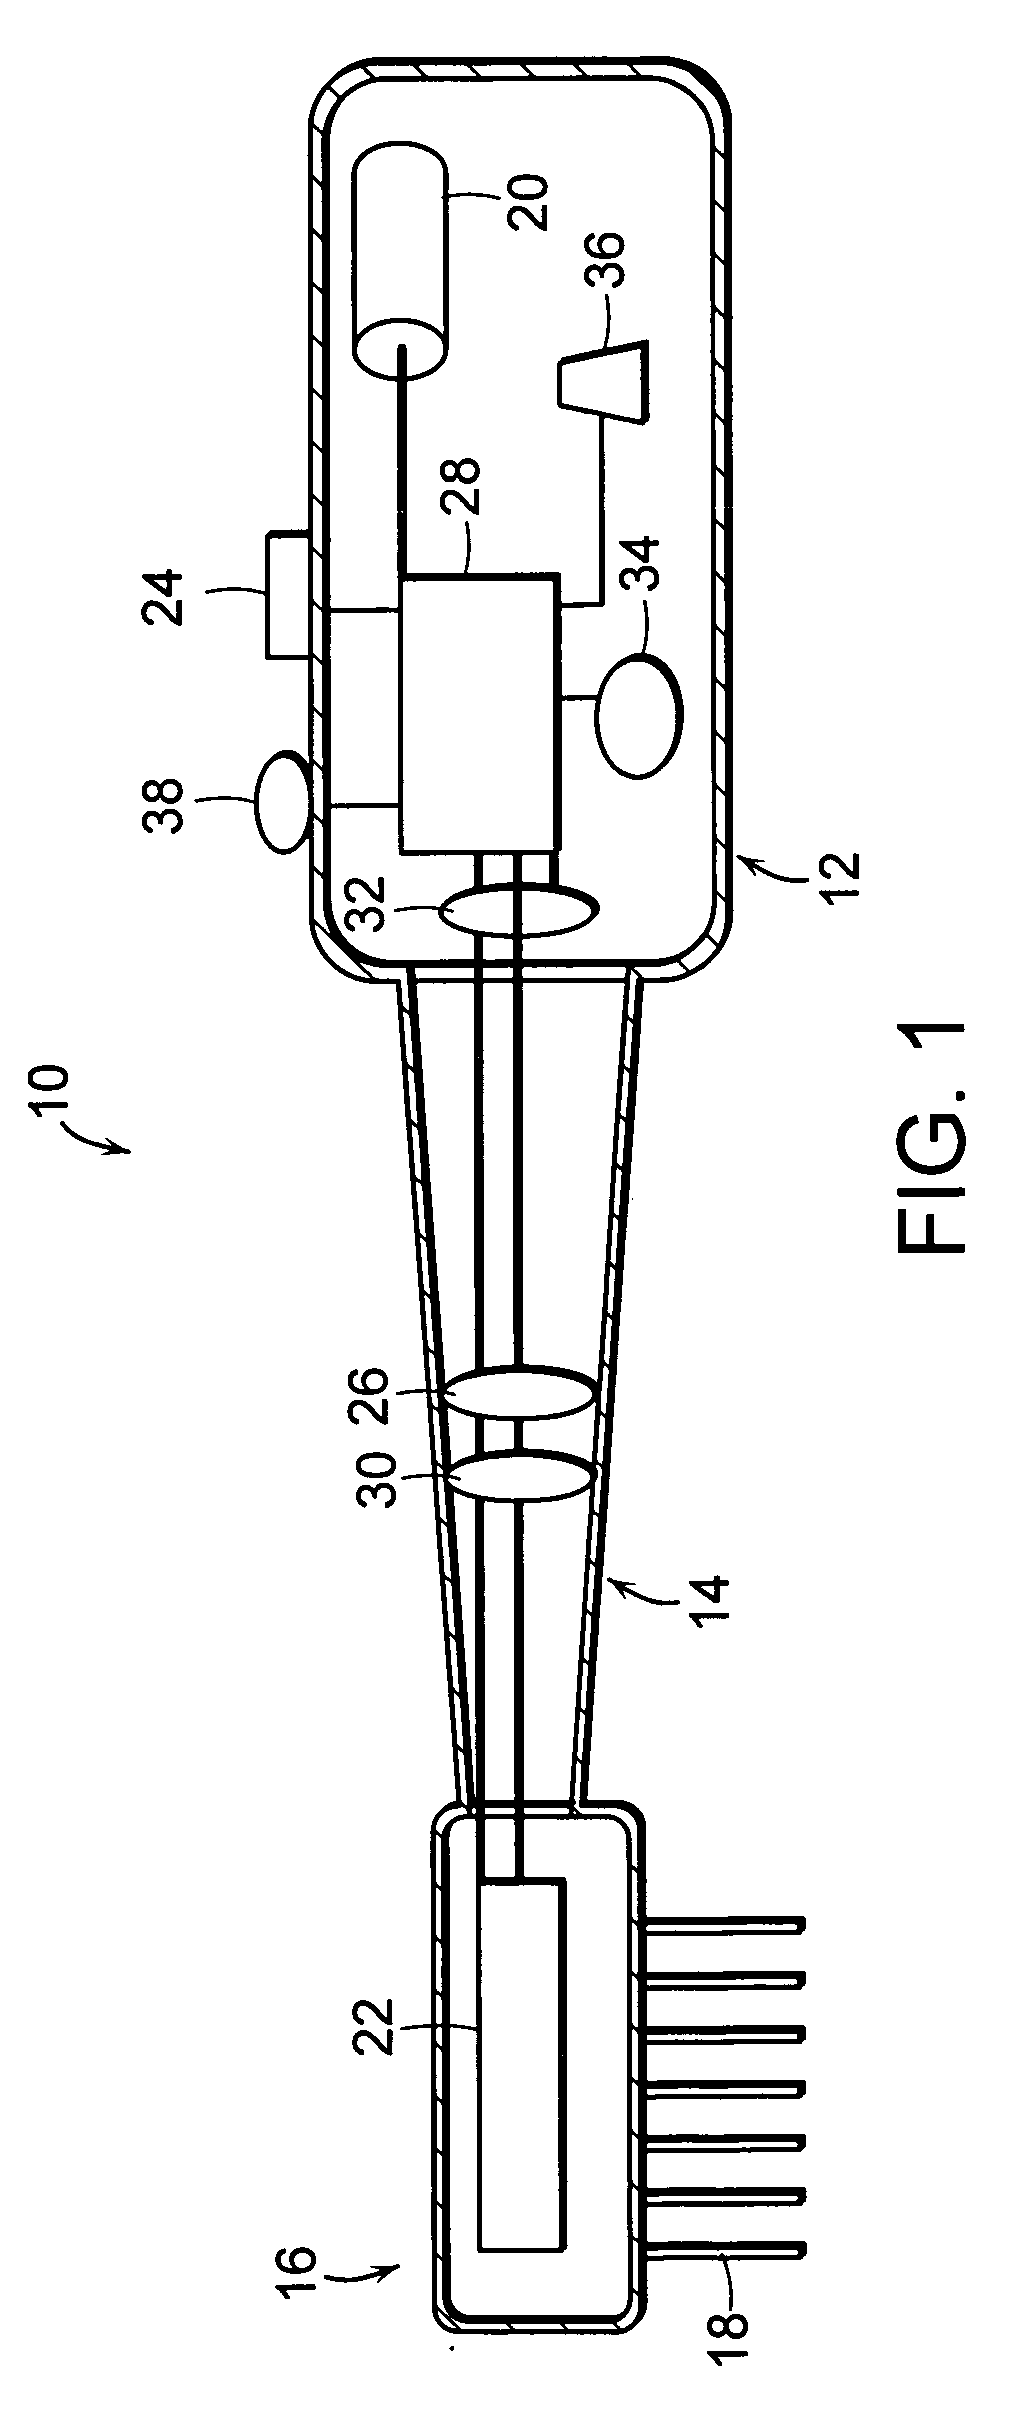 Temperature-regulated heat-emitting device and method of whitening teeth